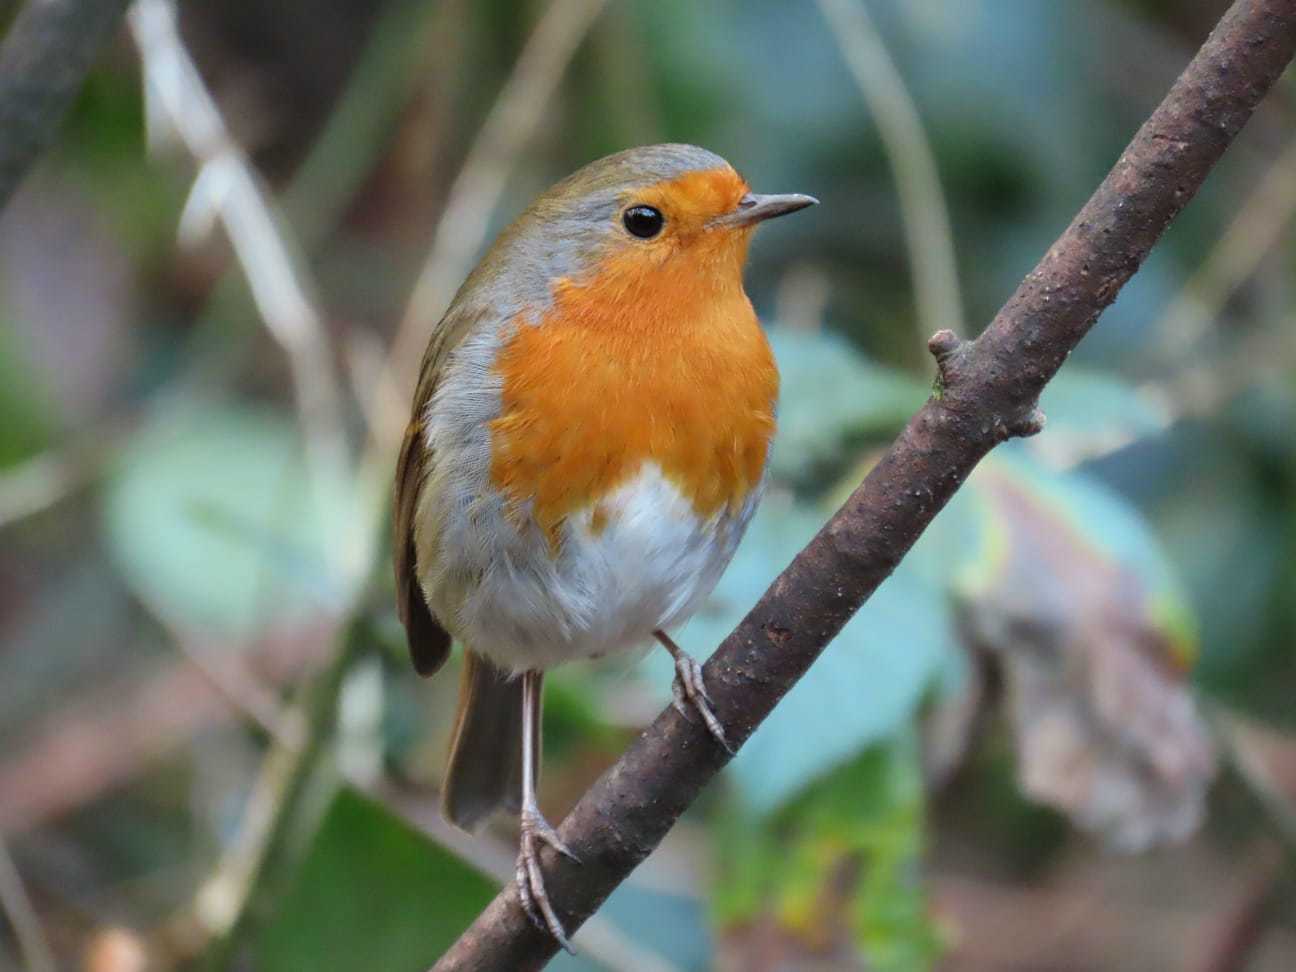 Robin red breast by Suzy Makin